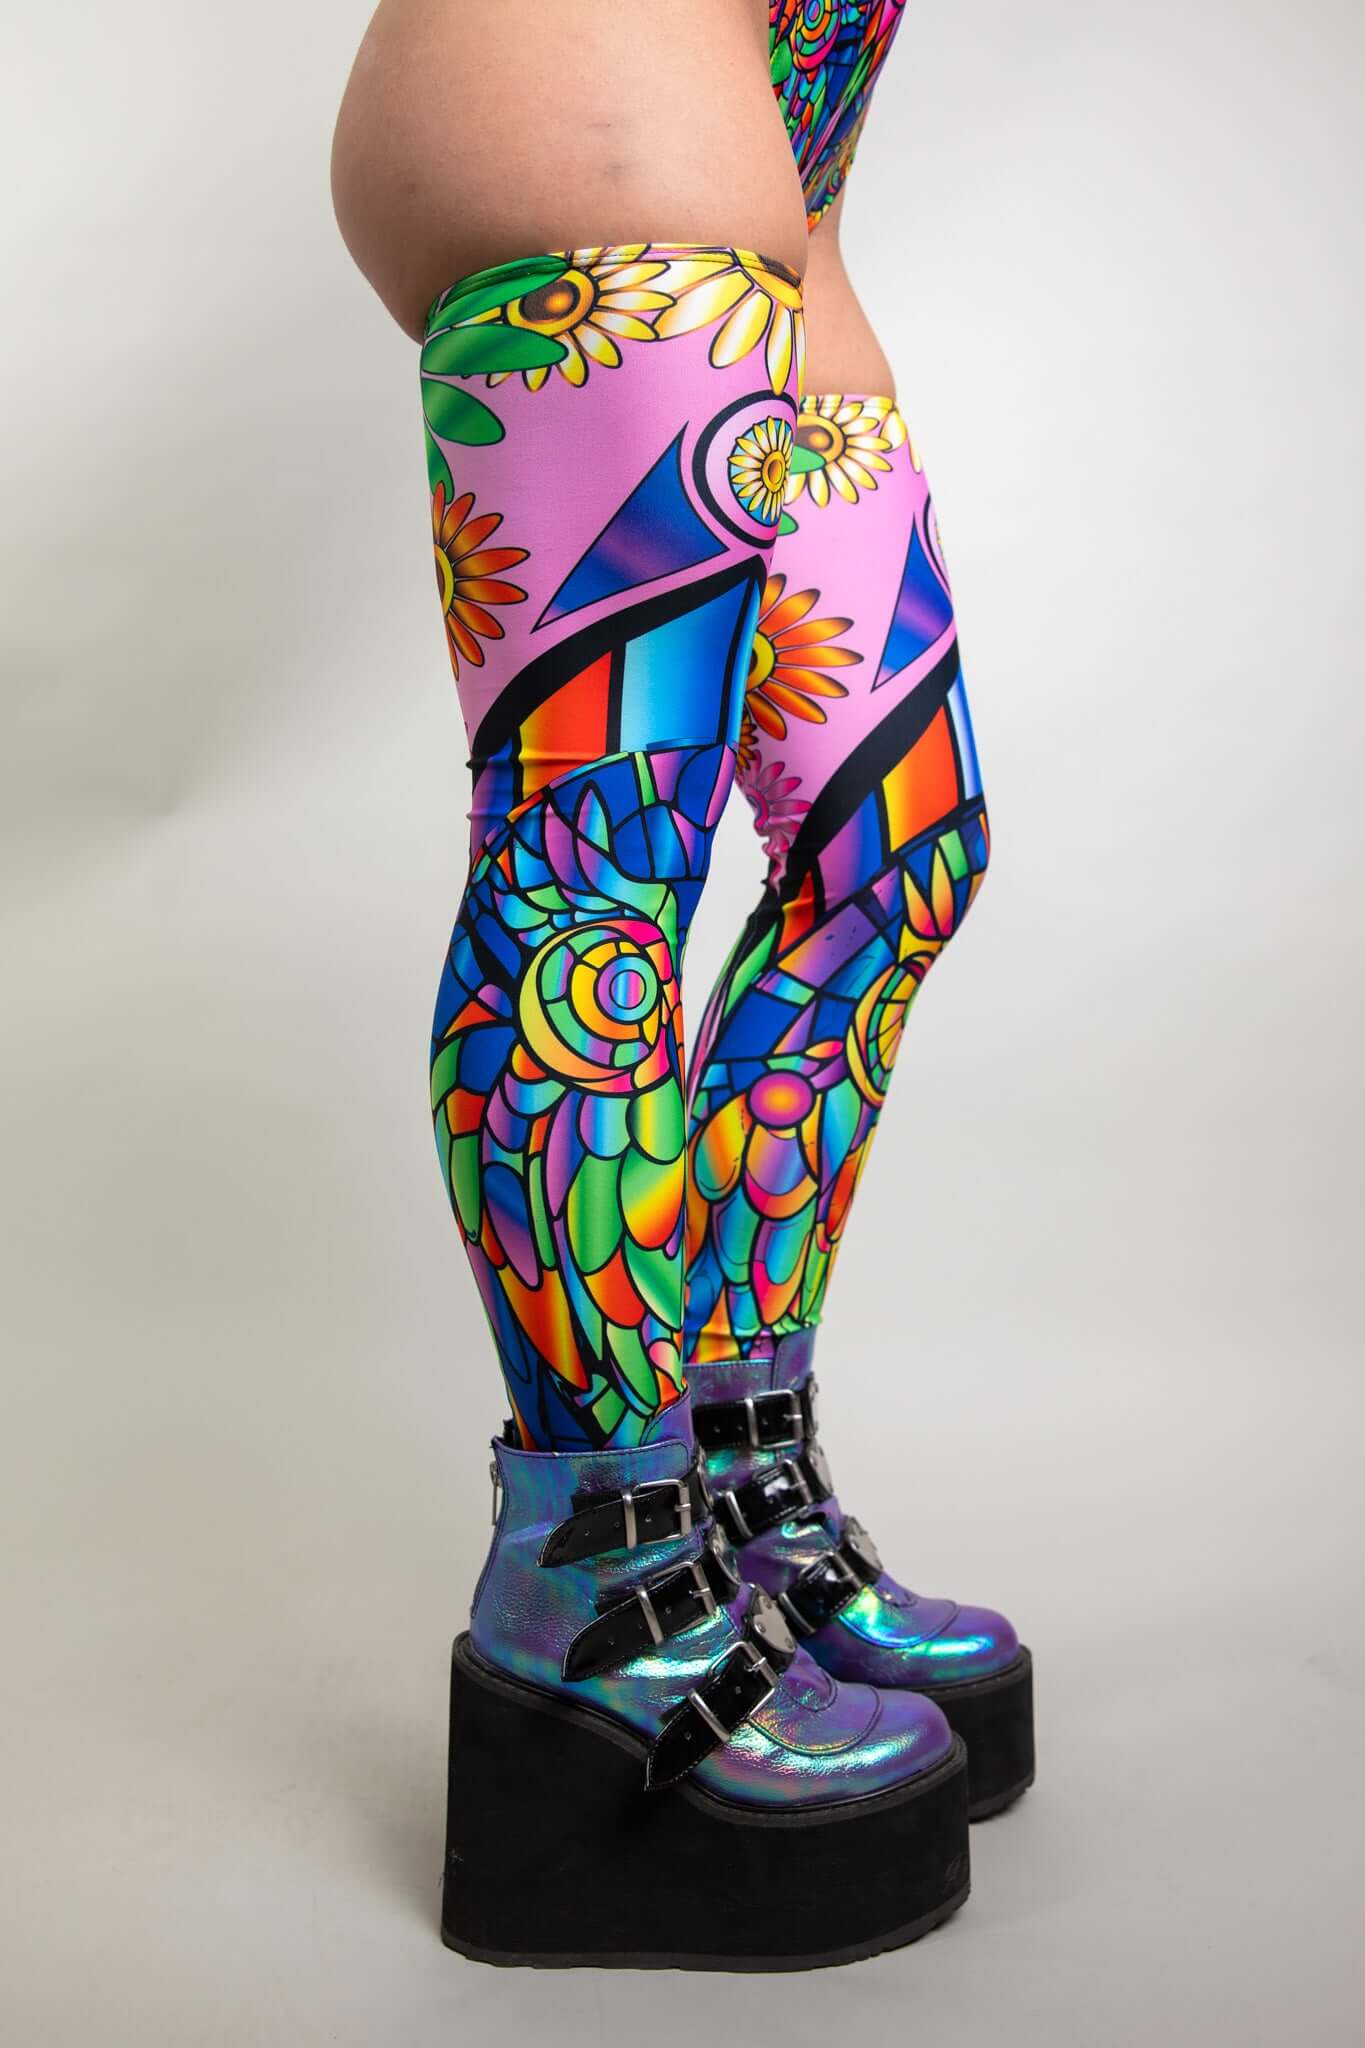 An up close photo of a girl's legs. She is wearing rainbow stained glass printed leg sleeves that go up to her mid thigh.